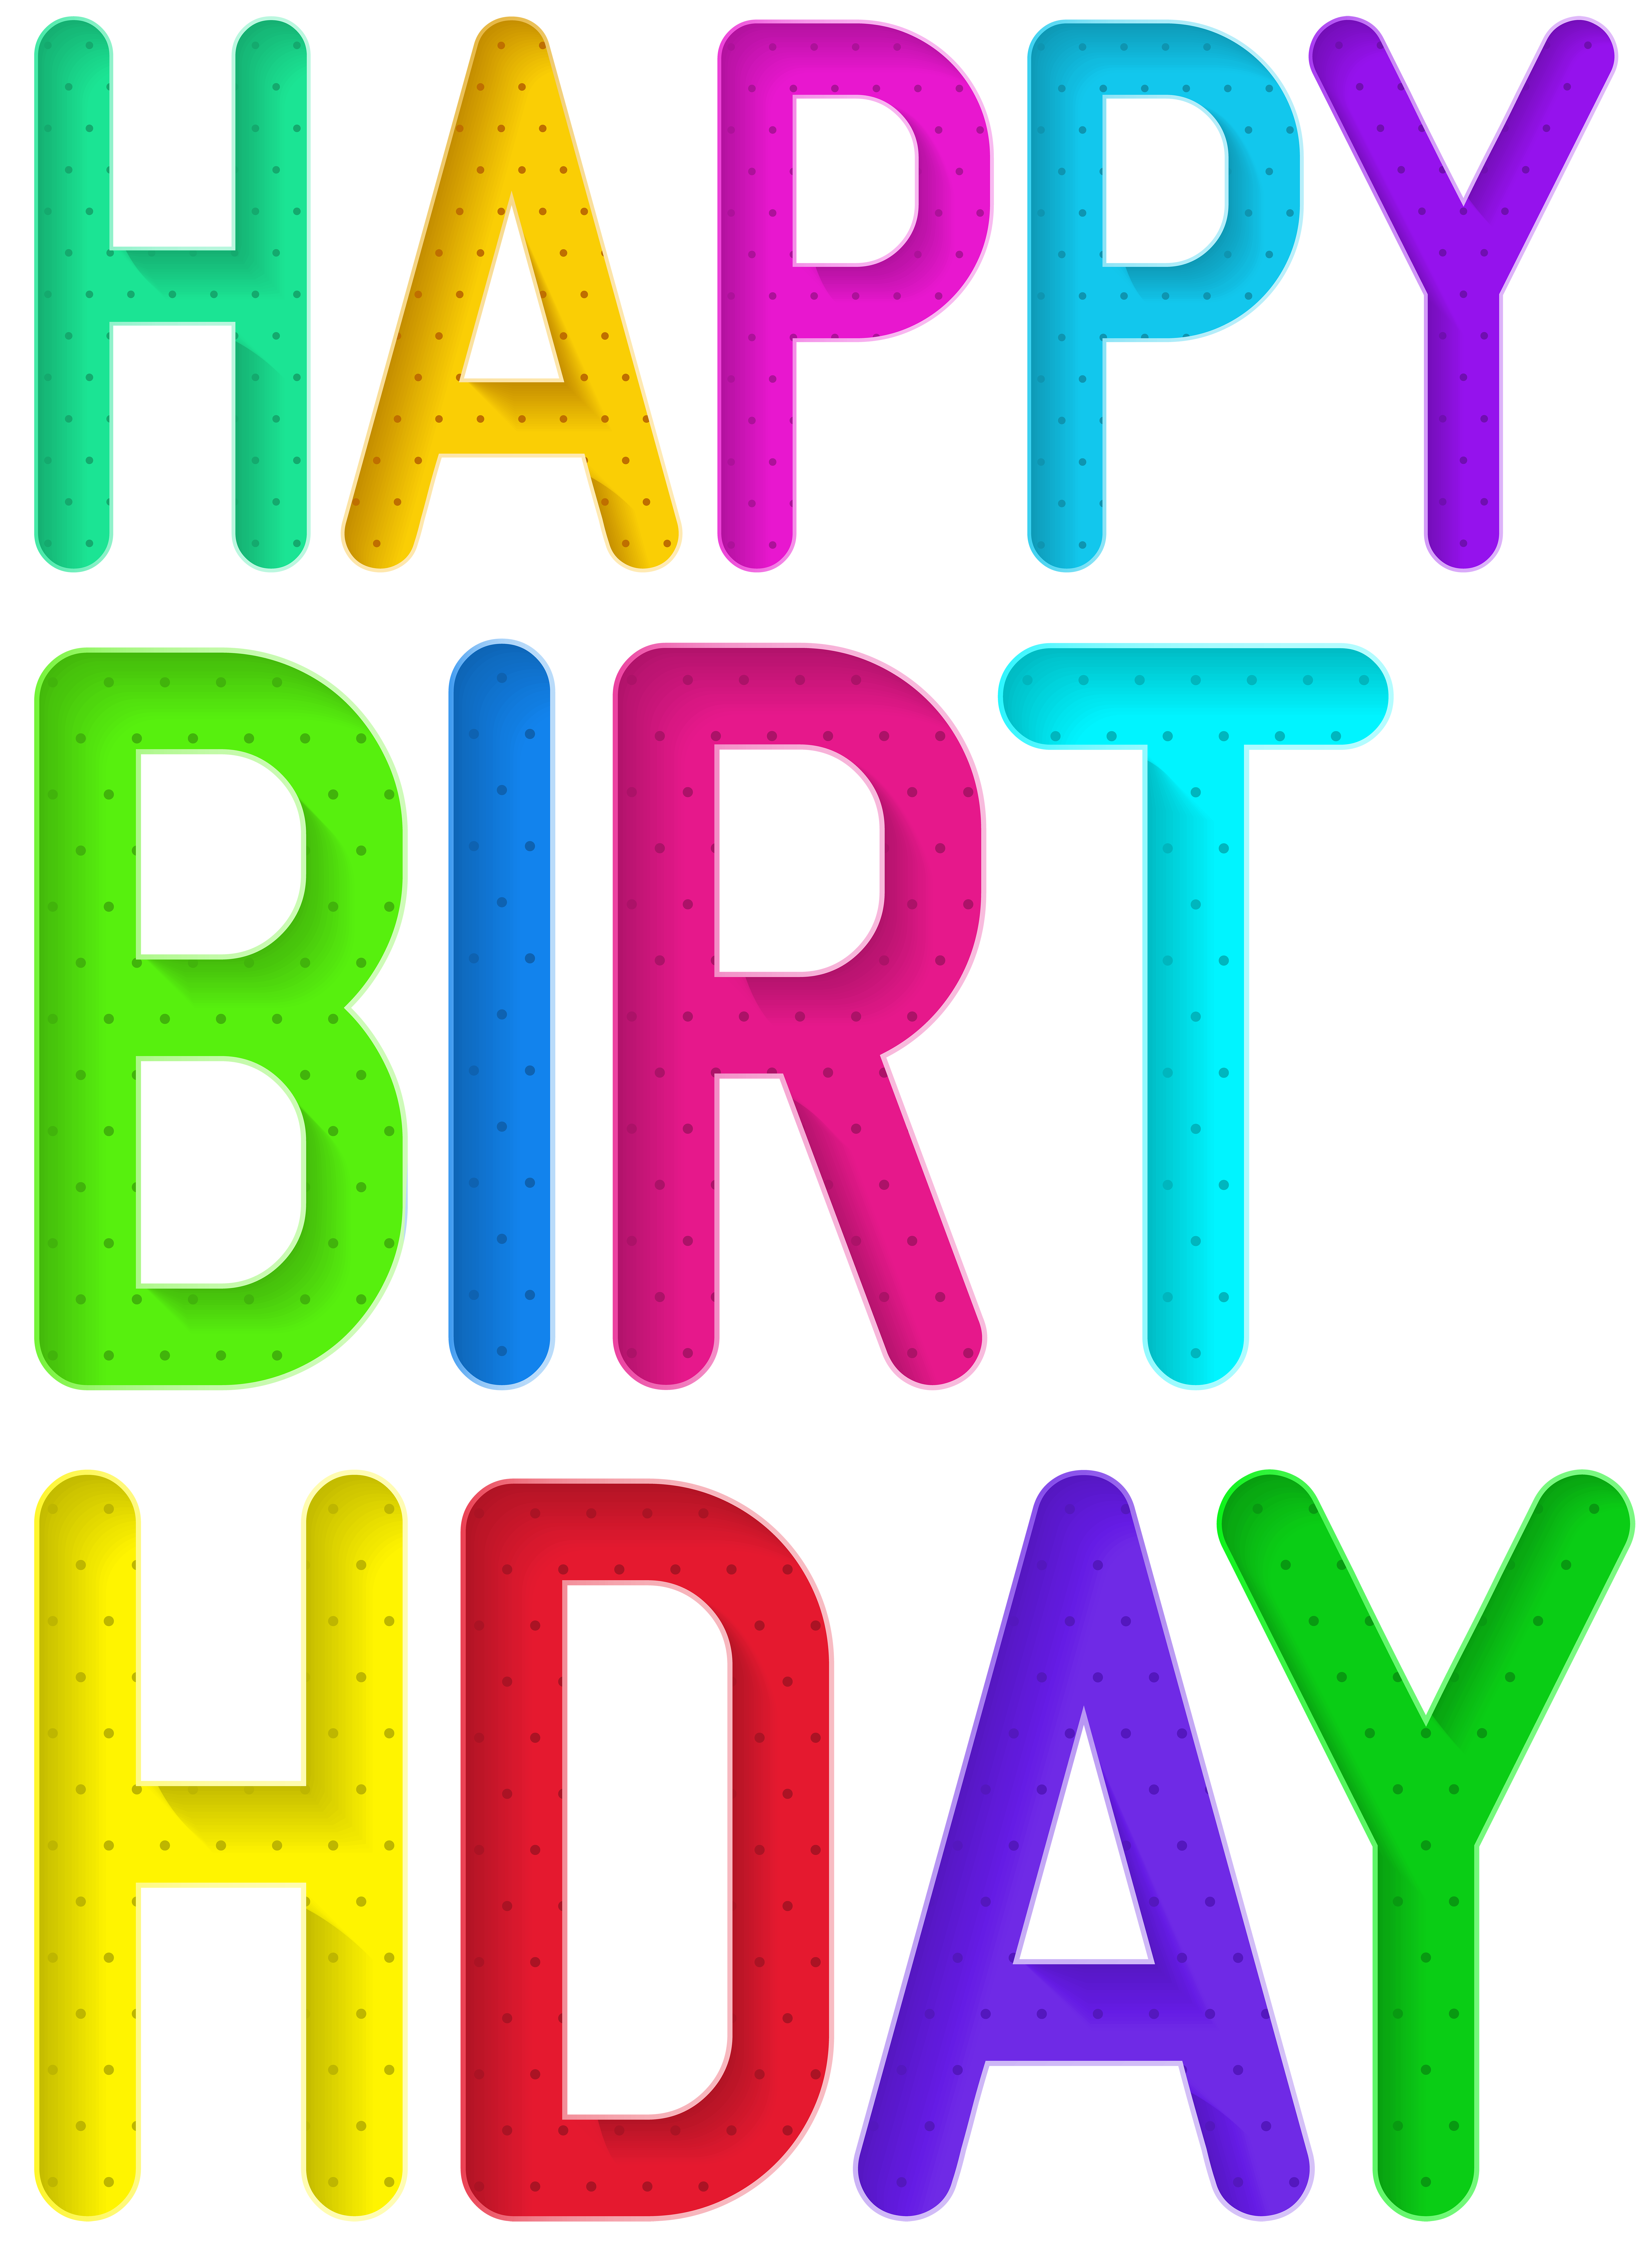 Colorful Happy Birthday Text PNG Image | Gallery Yopriceville - High ...